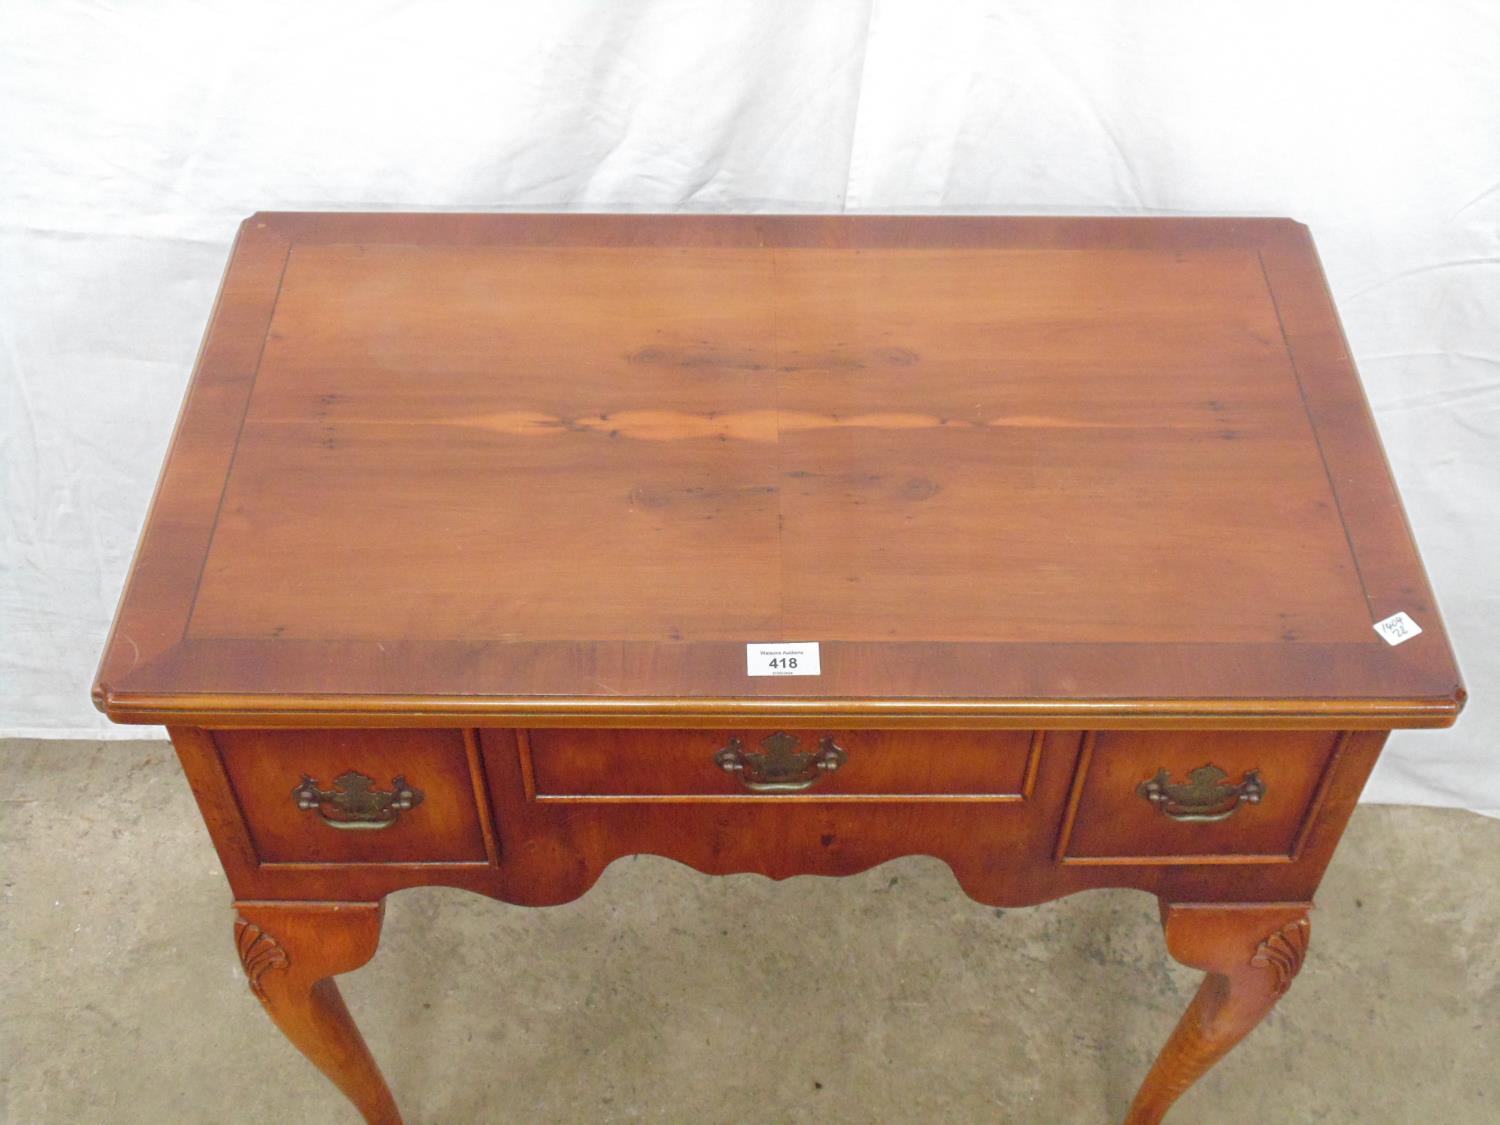 Yewwood lowboy having an arrangement of three drawers with swan neck handles, standing on four - Image 2 of 4